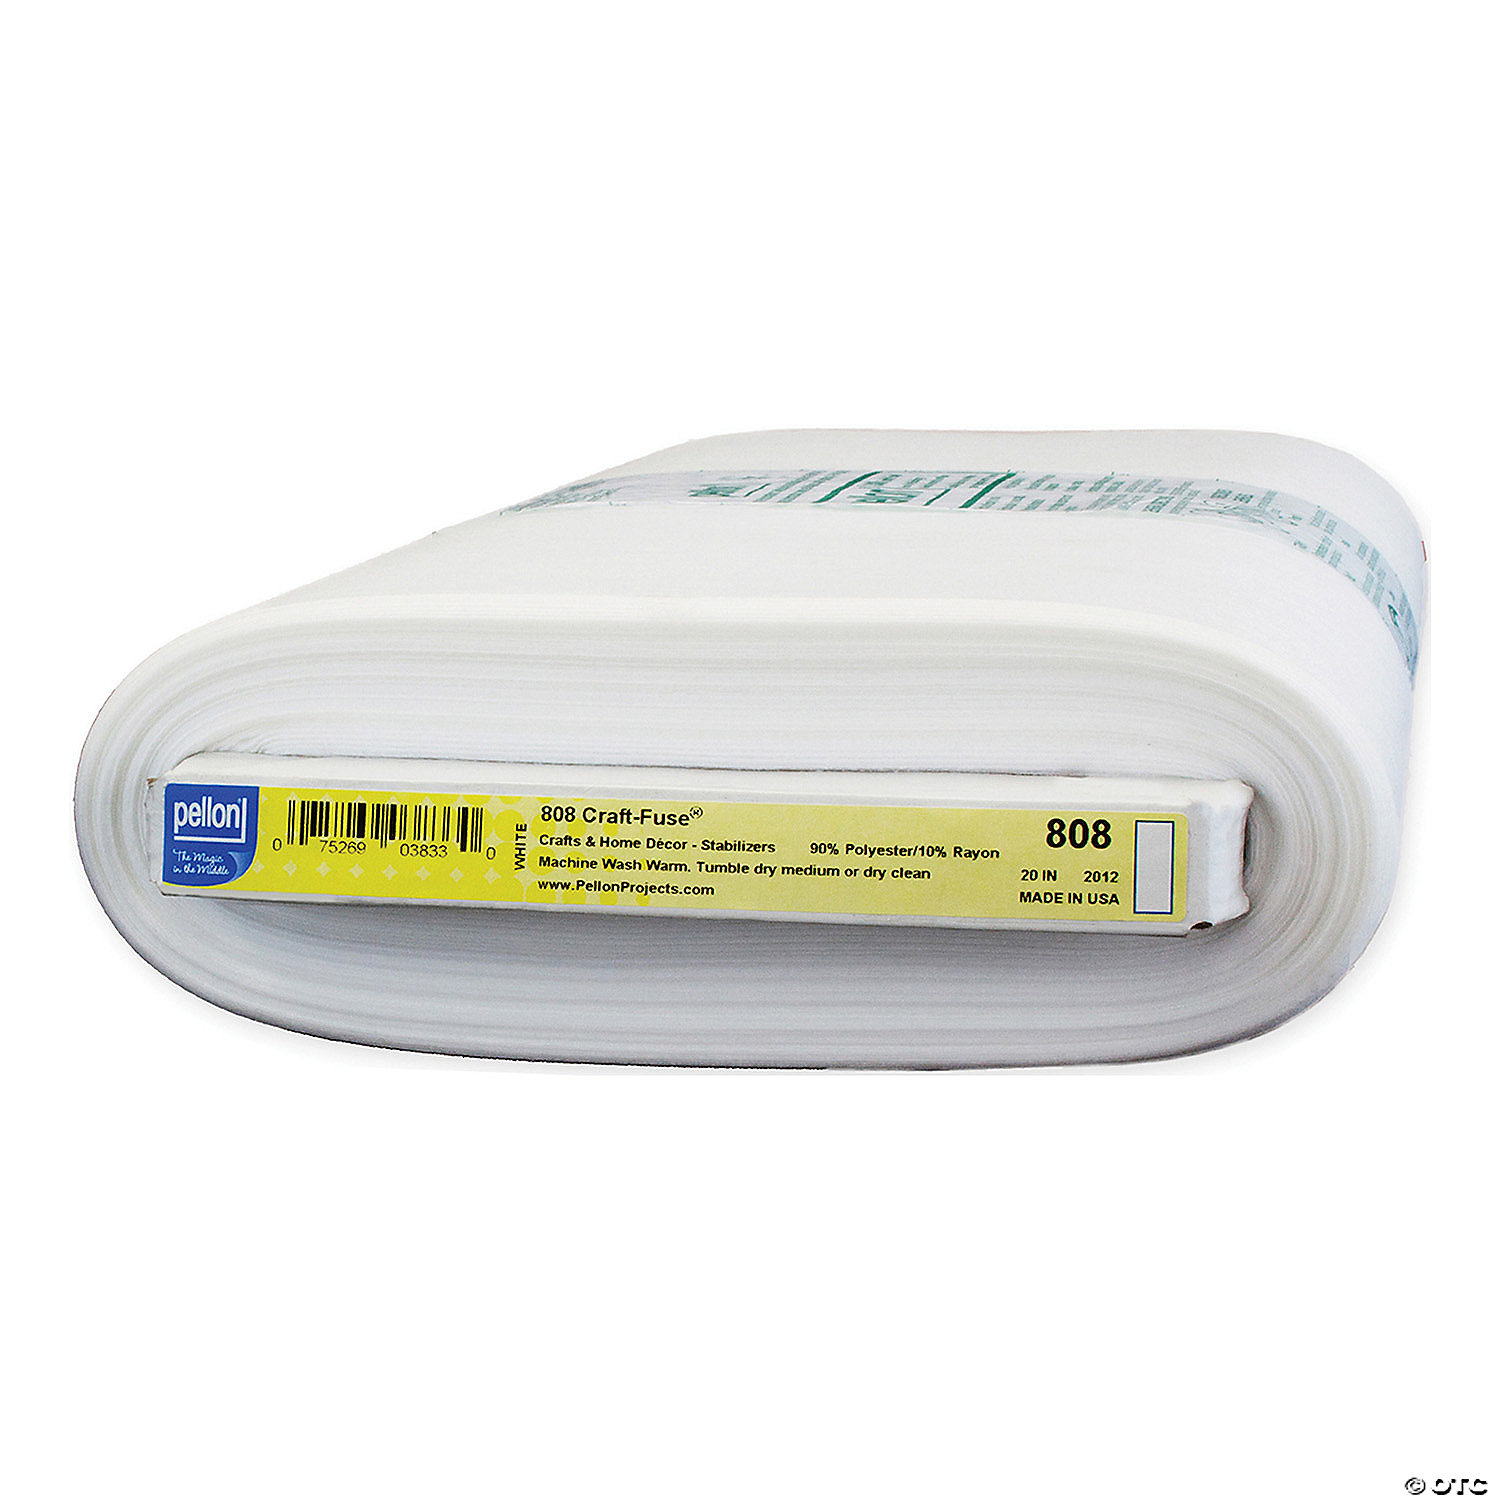 Pellon 931td Fusible Midweight, White, 20 x 10 Yards